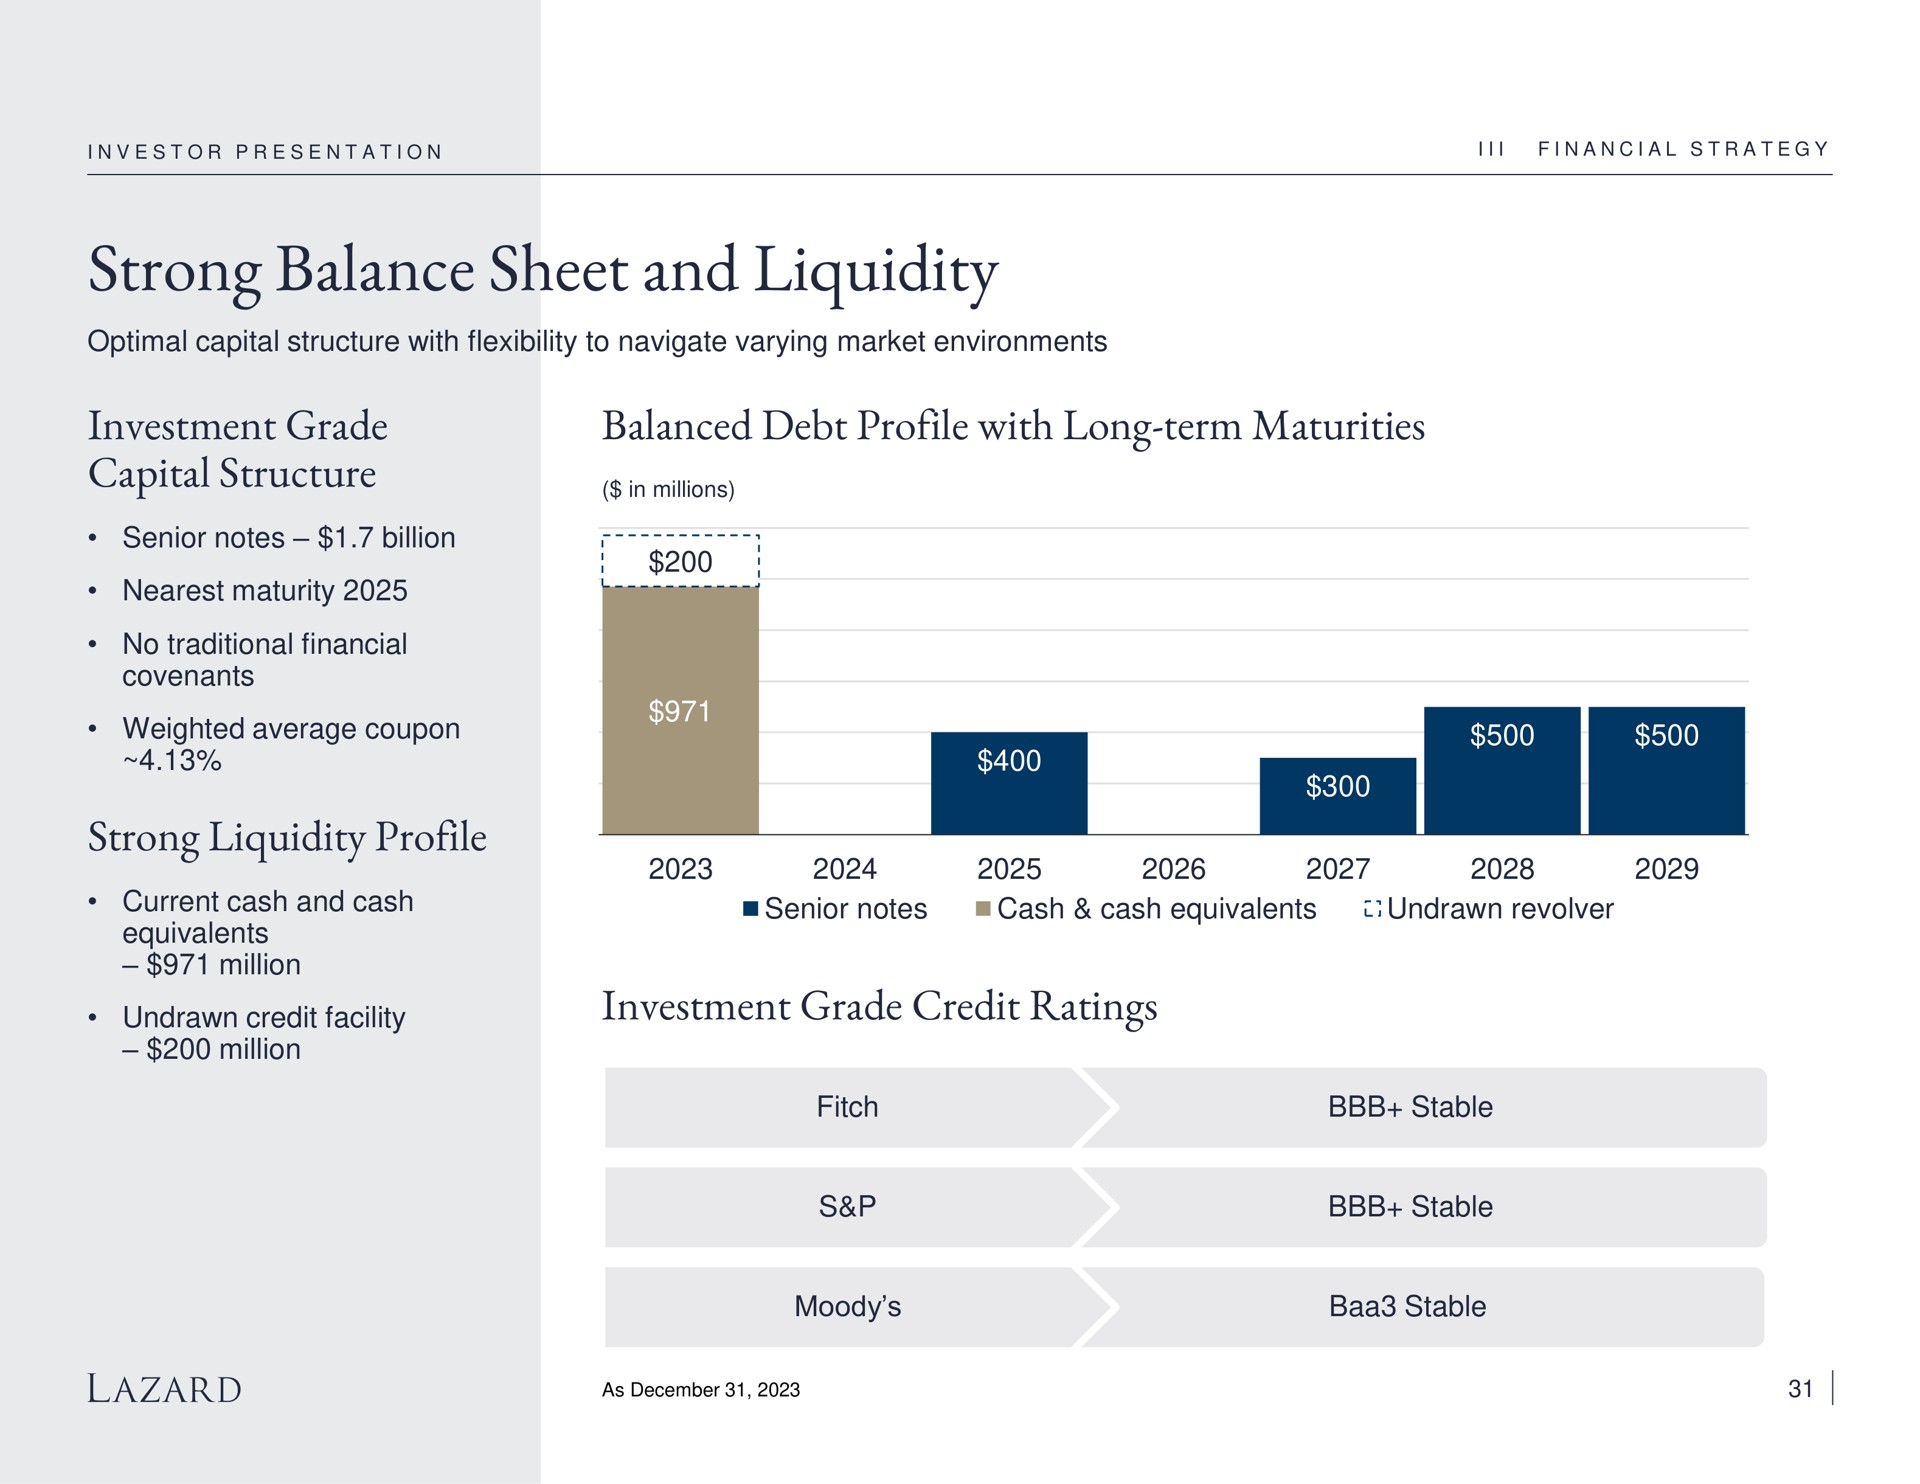 strong balance sheet and liquidity investment grade capital structure strong liquidity profile balanced debt profile with long term maturities investment grade credit ratings current cash cash undrawn facility notes cash cash equivalents undrawn revolver as | Lazard